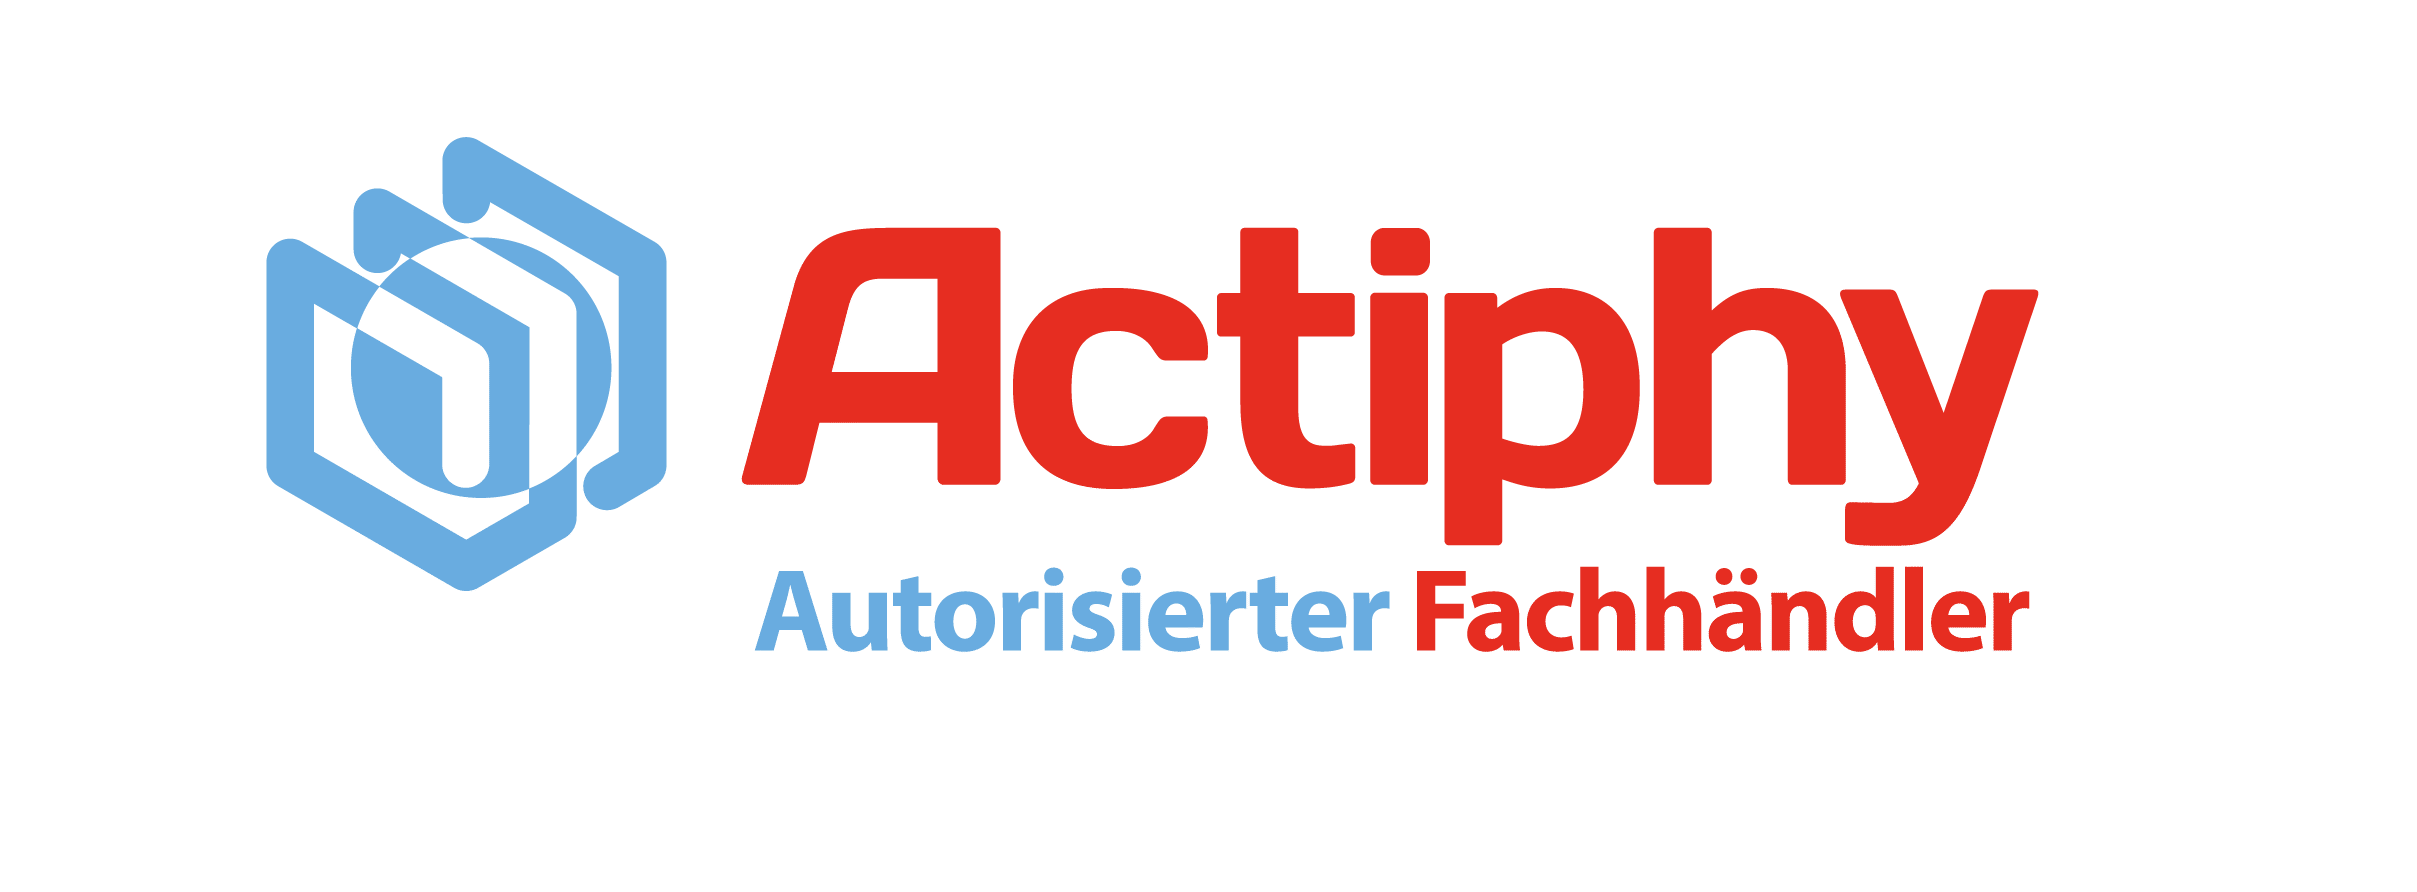 Actiphy ist Partner von Richter Learning Systems